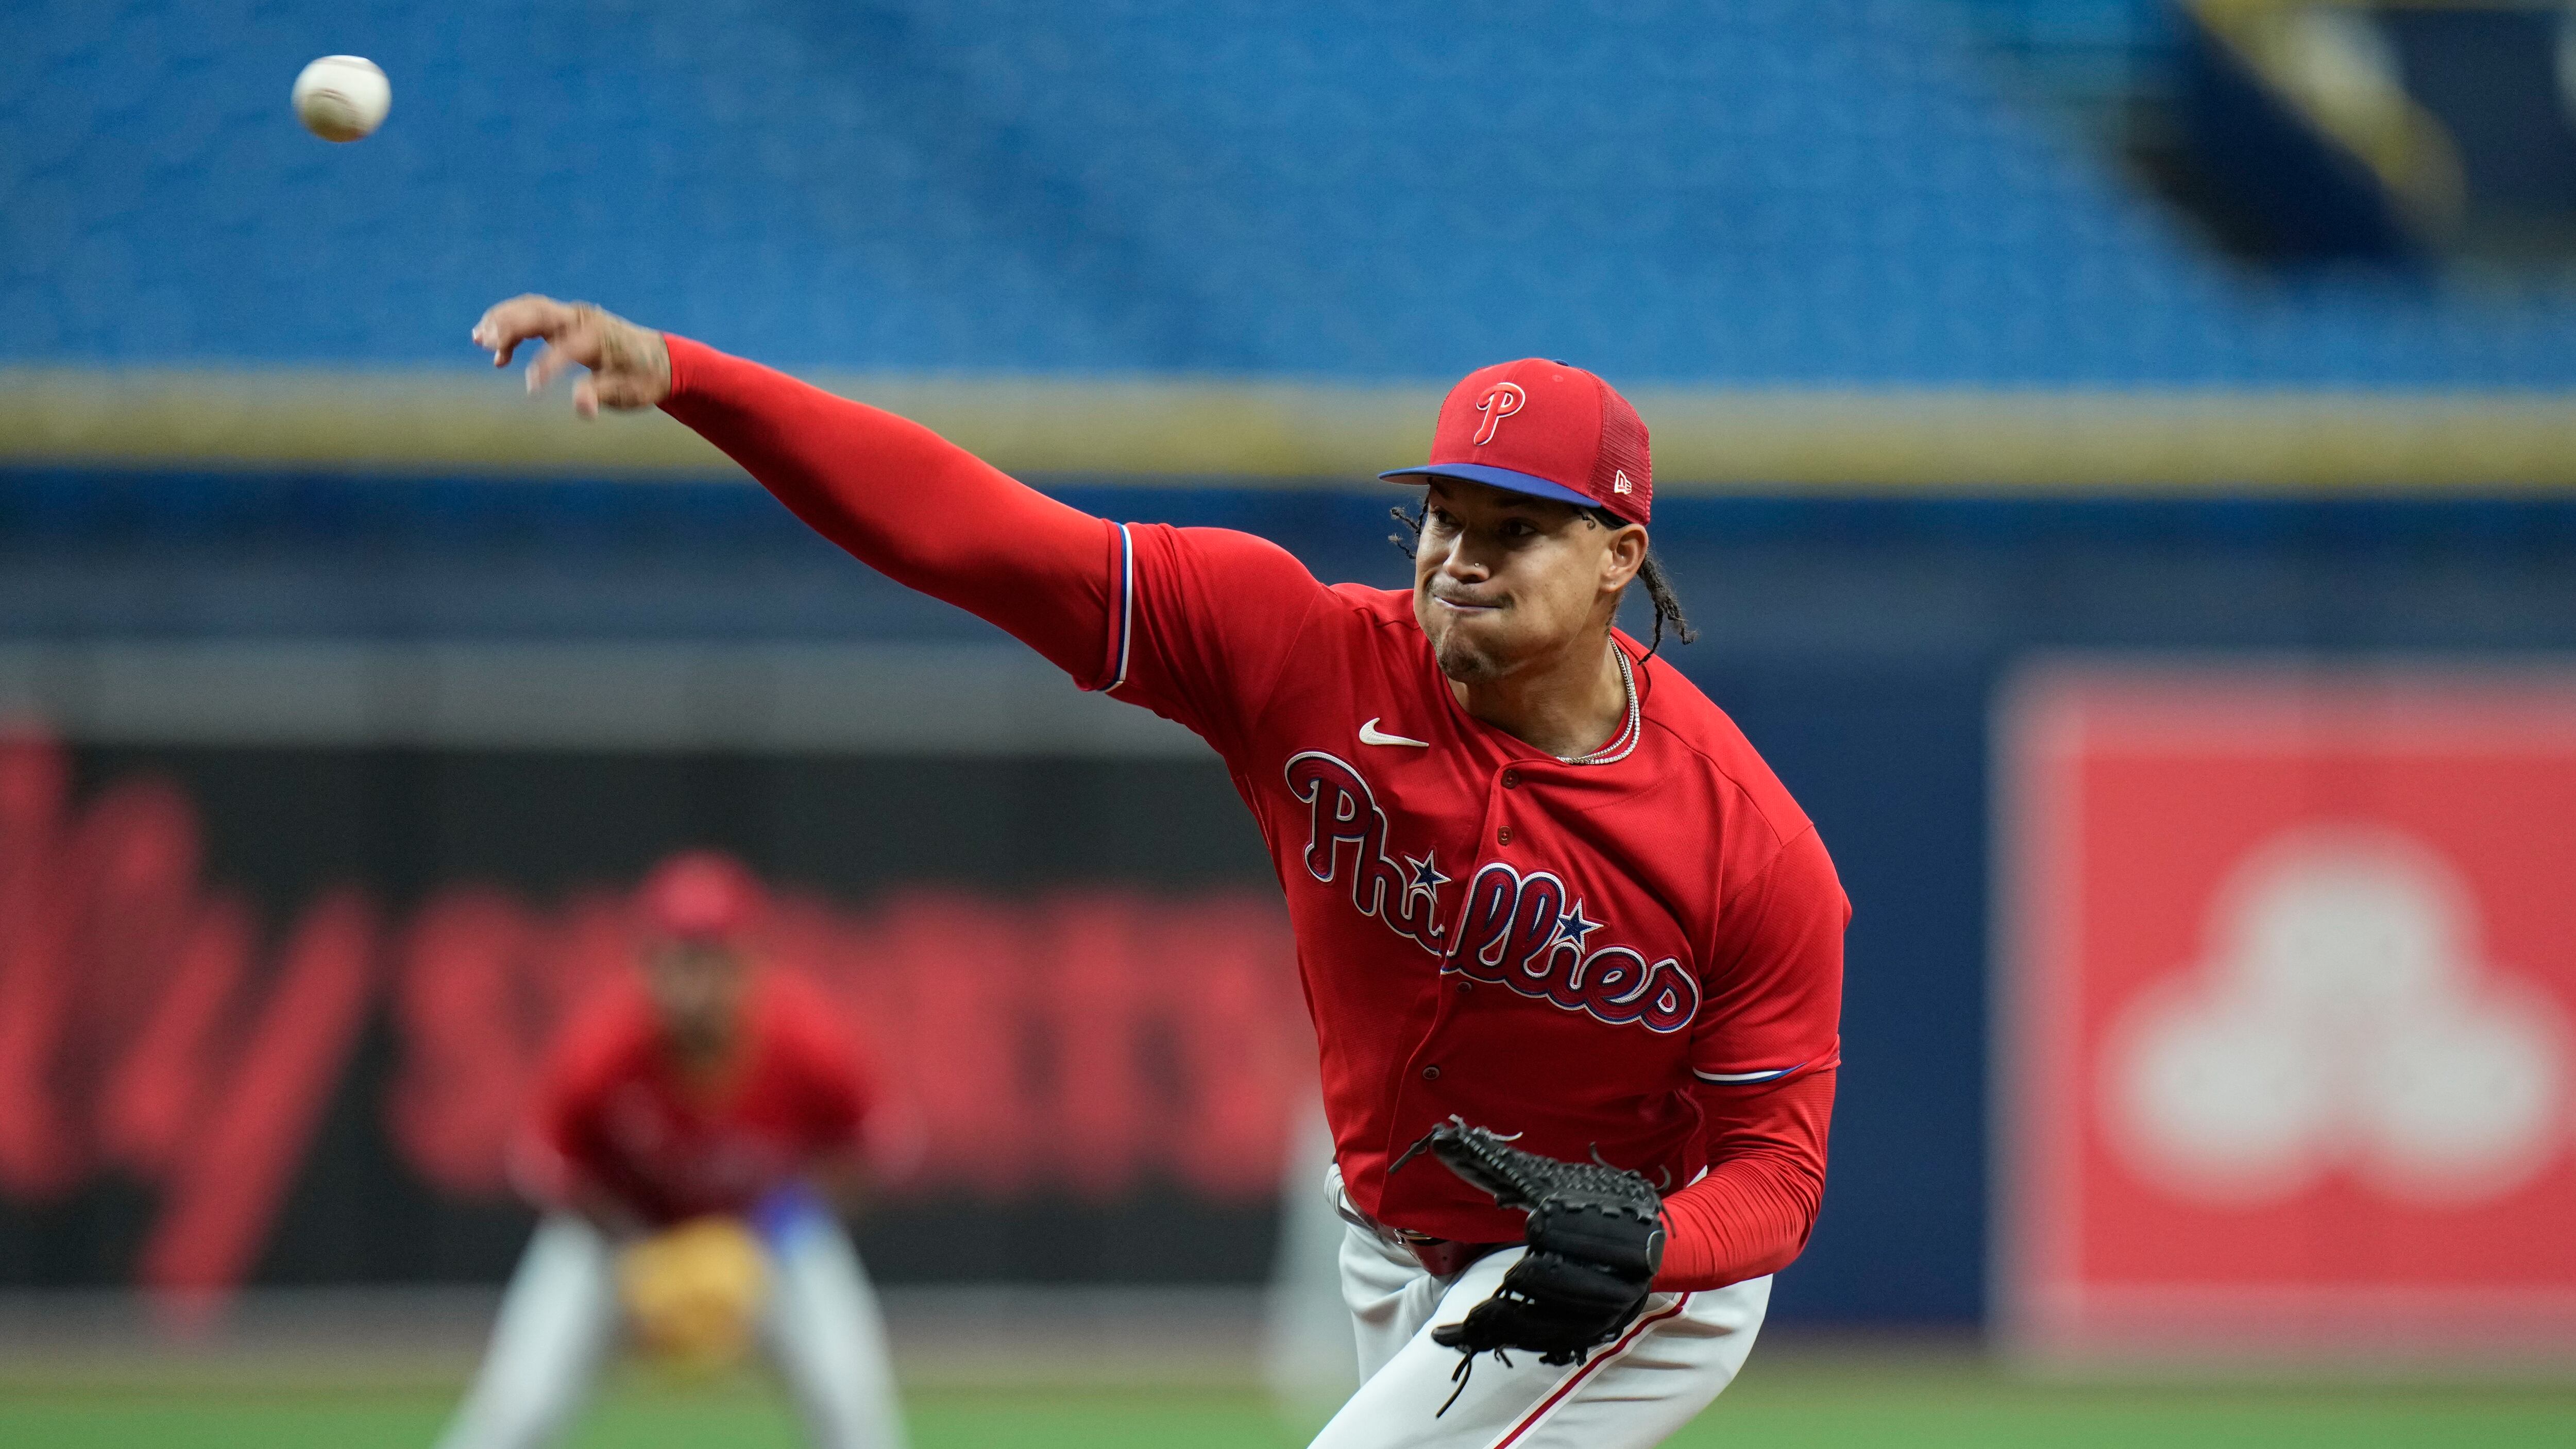 Ranger Suarez' injury & two losses in Miami will finally spell the end for  the Phillies